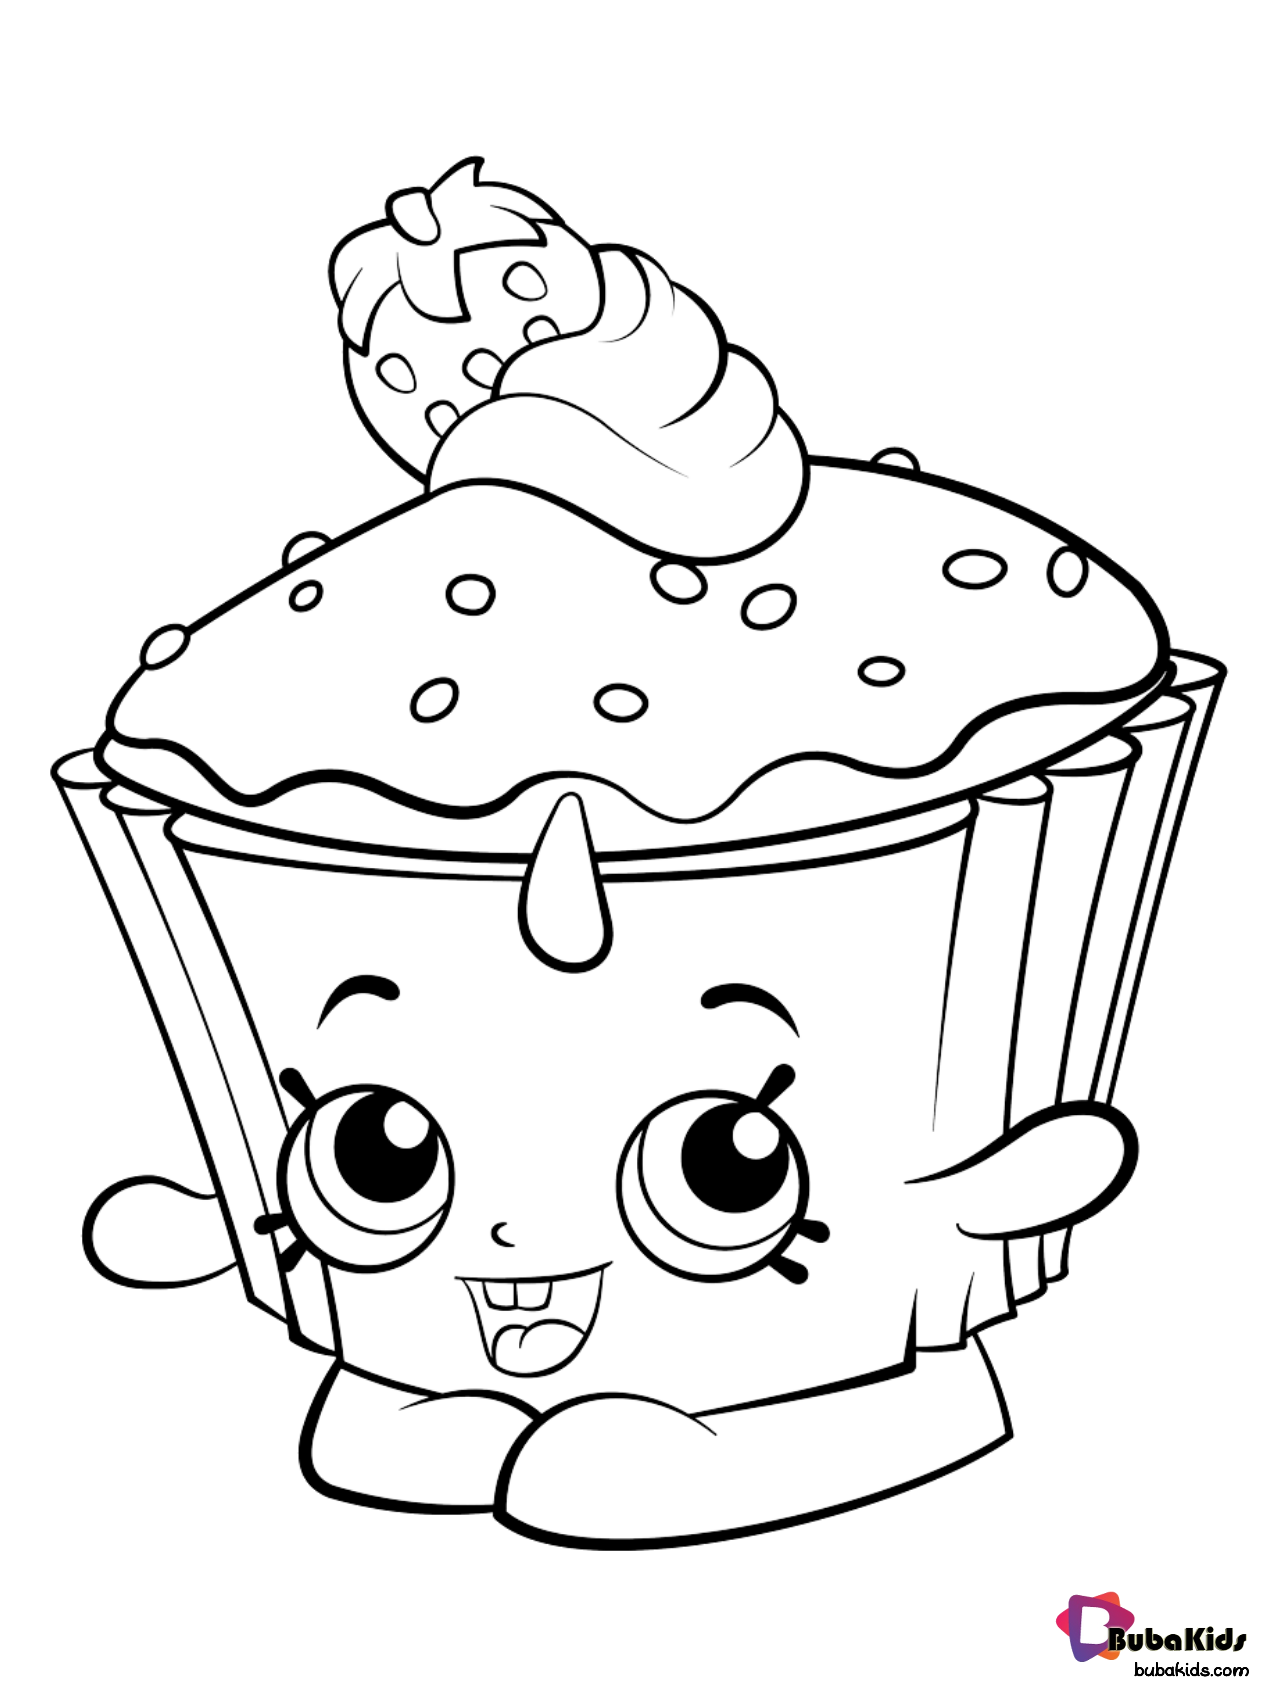 Free download Strawberry cup cake coloring page for preschoolers. Wallpaper